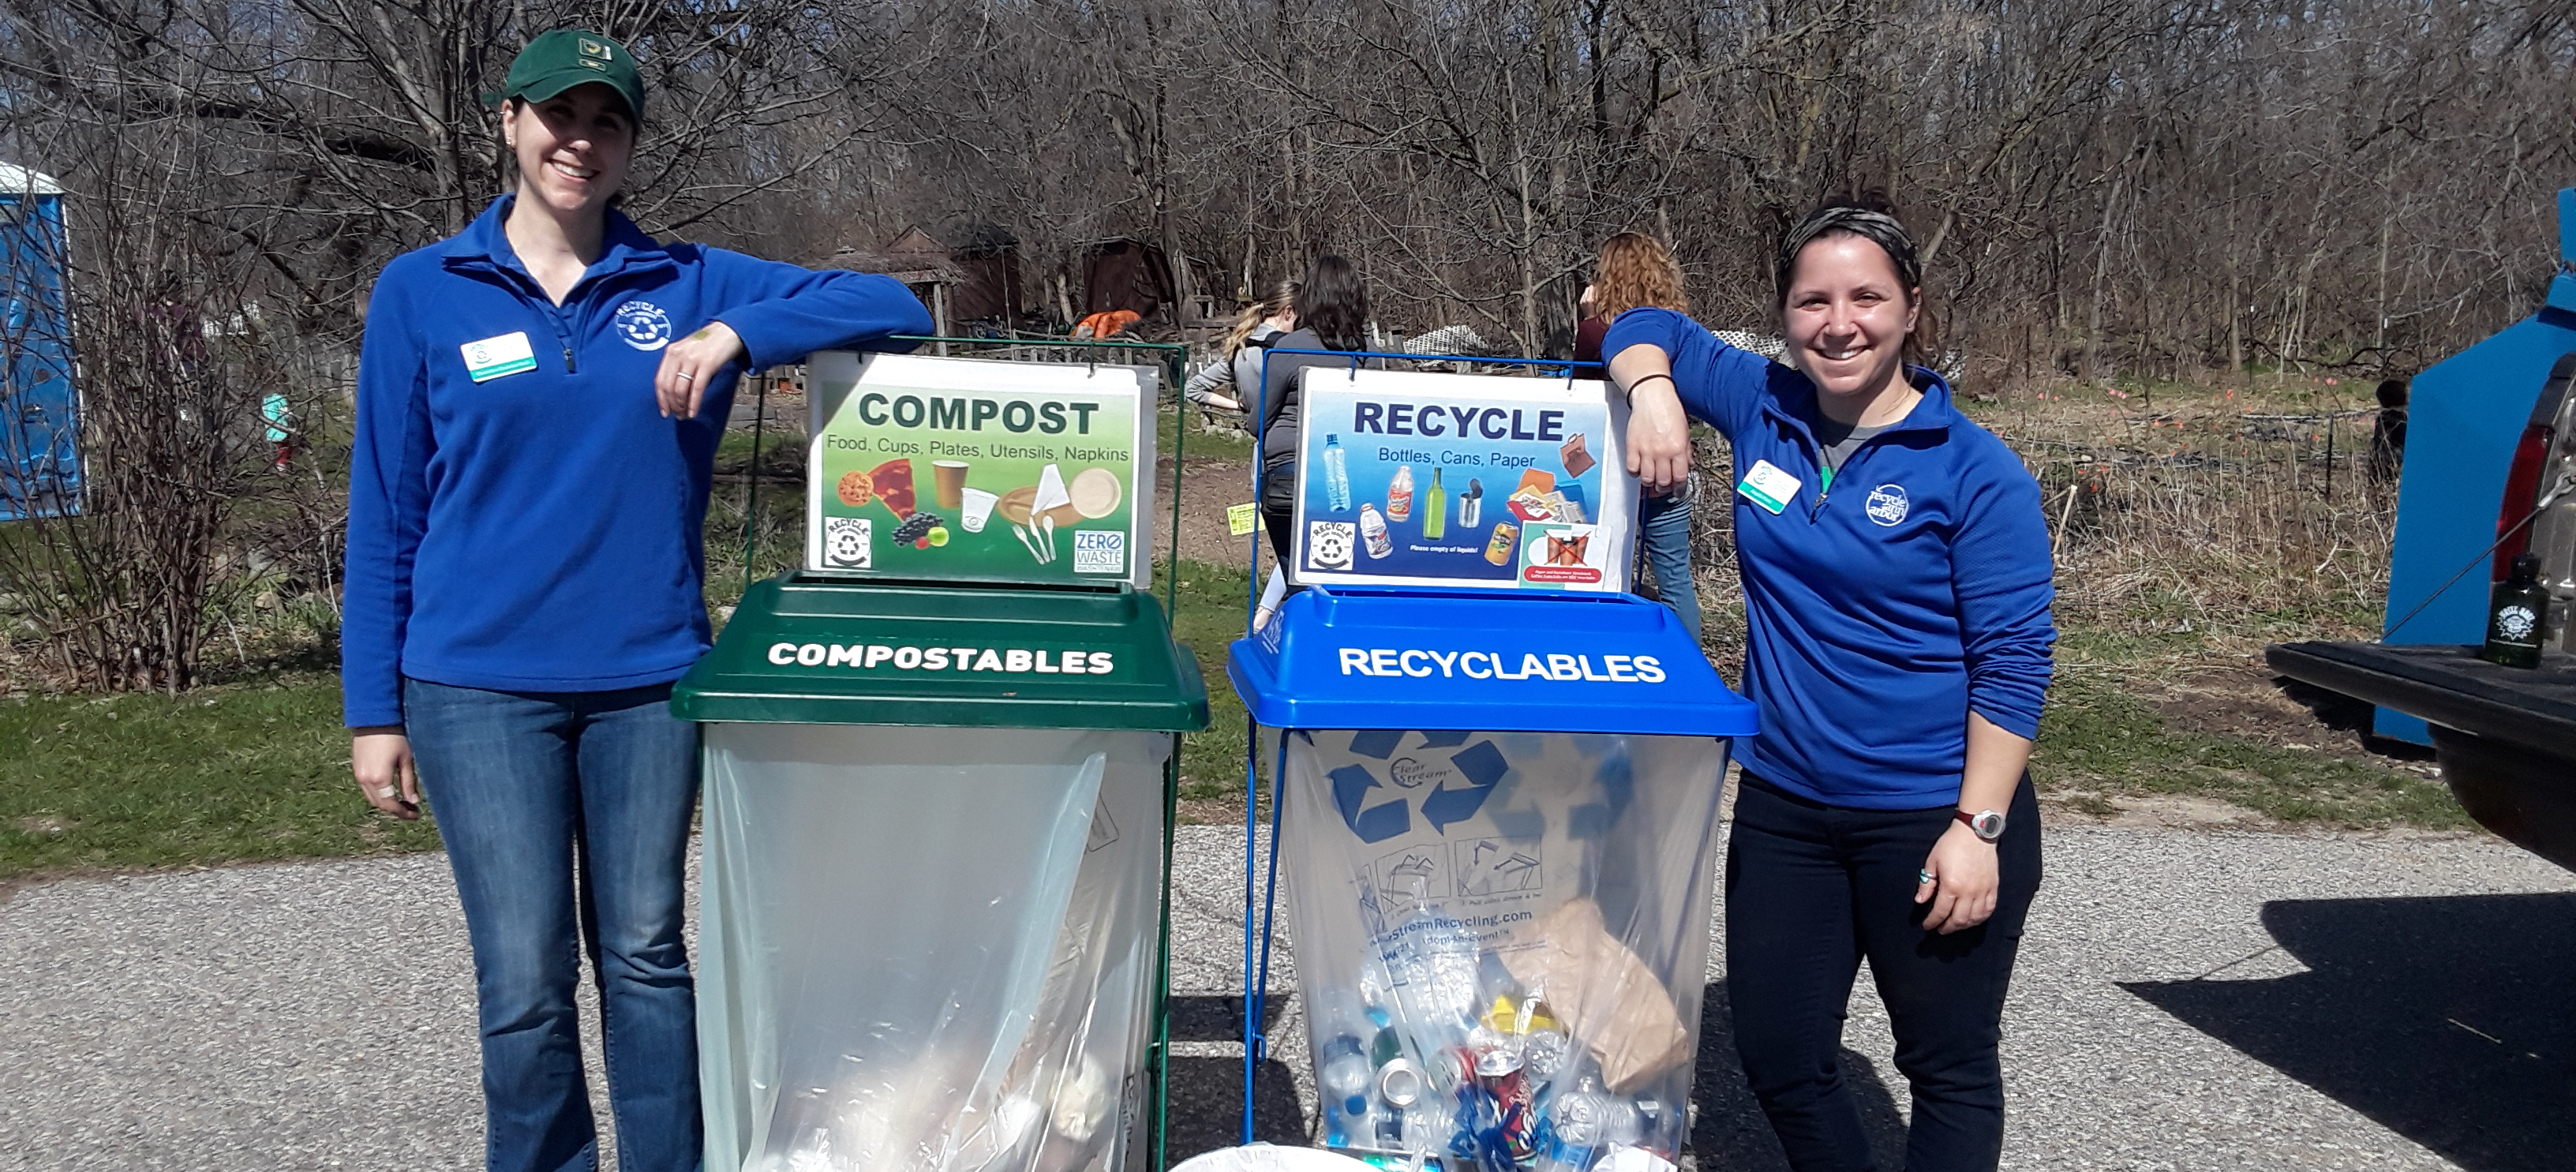 Recycle Ann Arbor Says Farewell to Christine Chessler-Stull and Welcomes Angela Porta